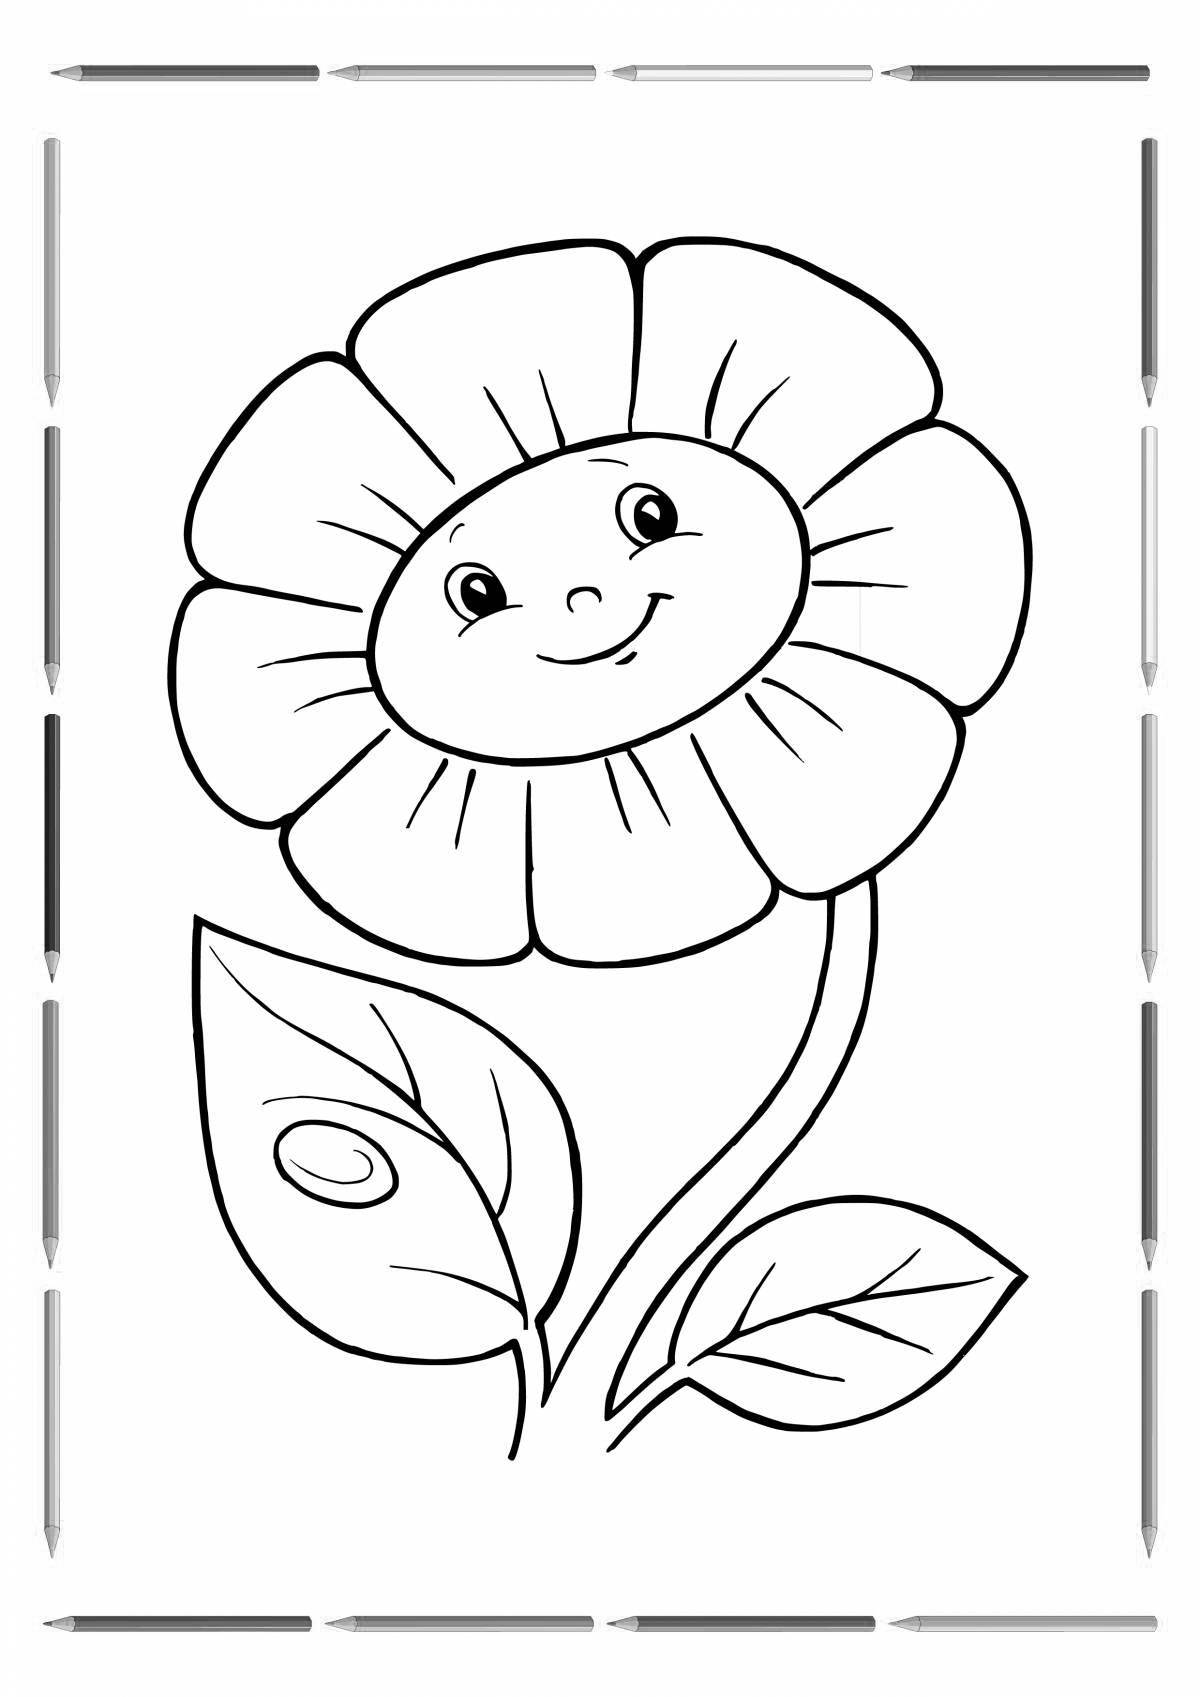 Amazing flower coloring book for 5-6 year olds